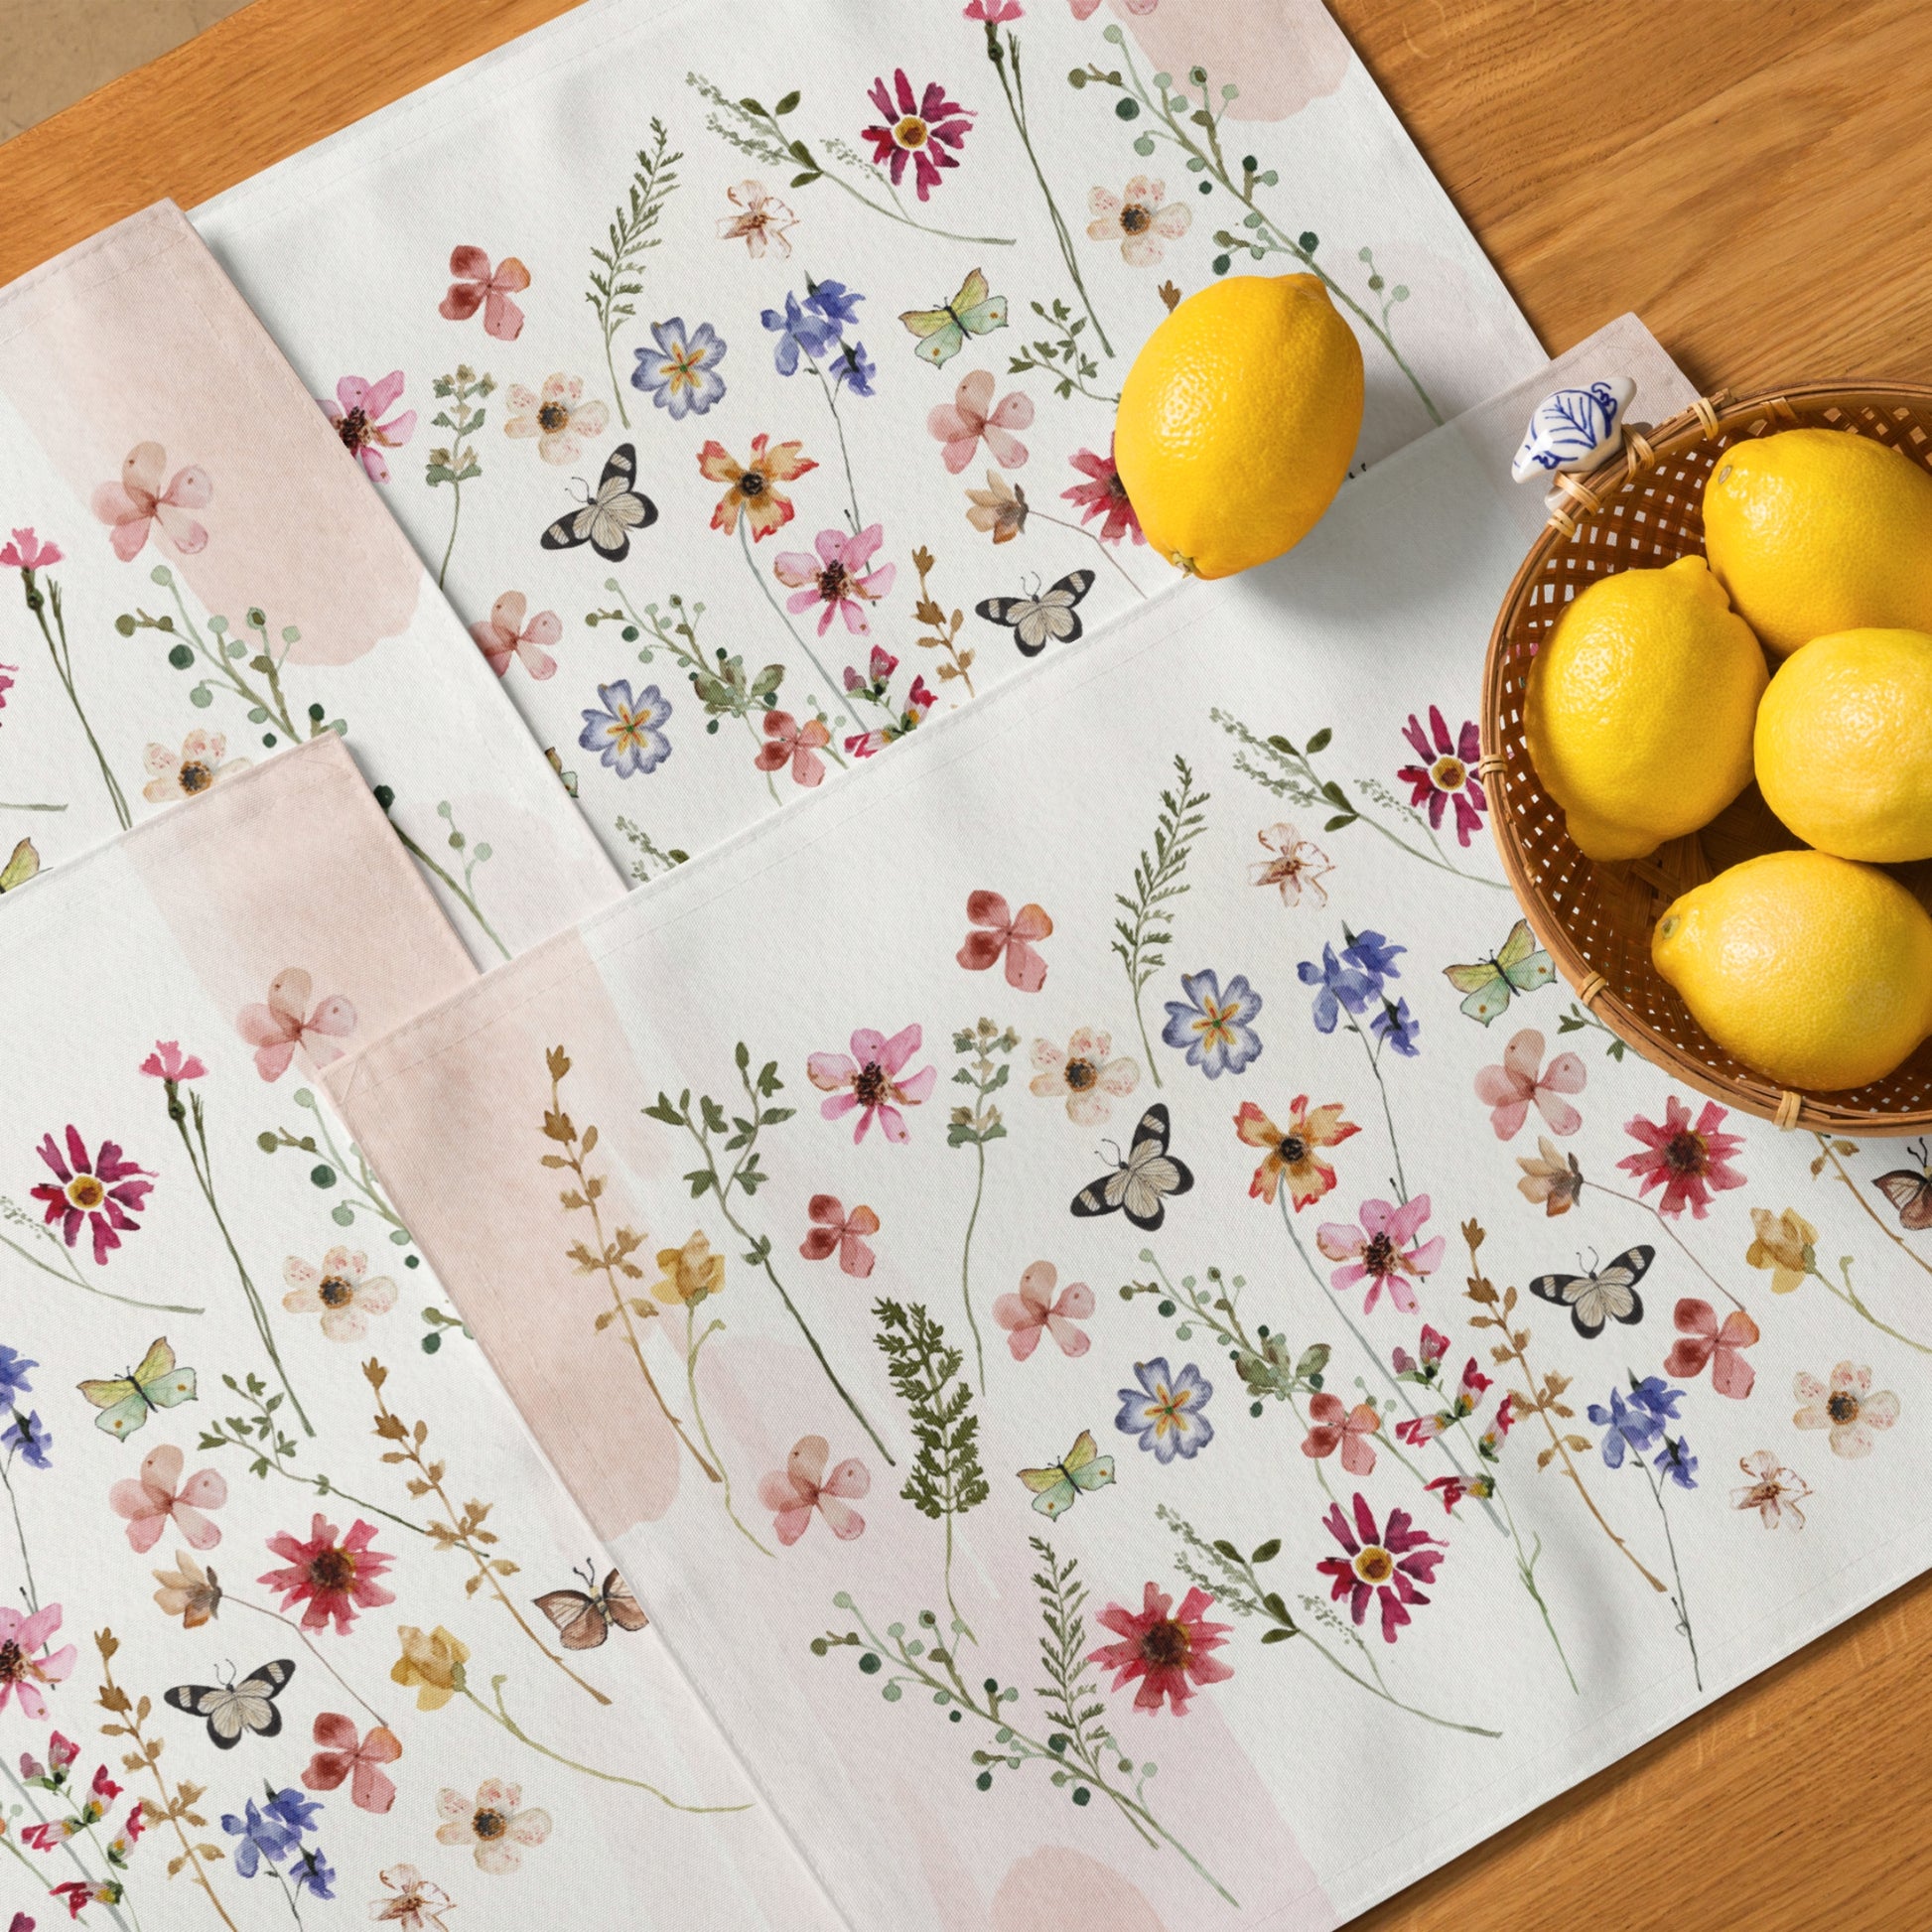 Placemats on wood table with lemon